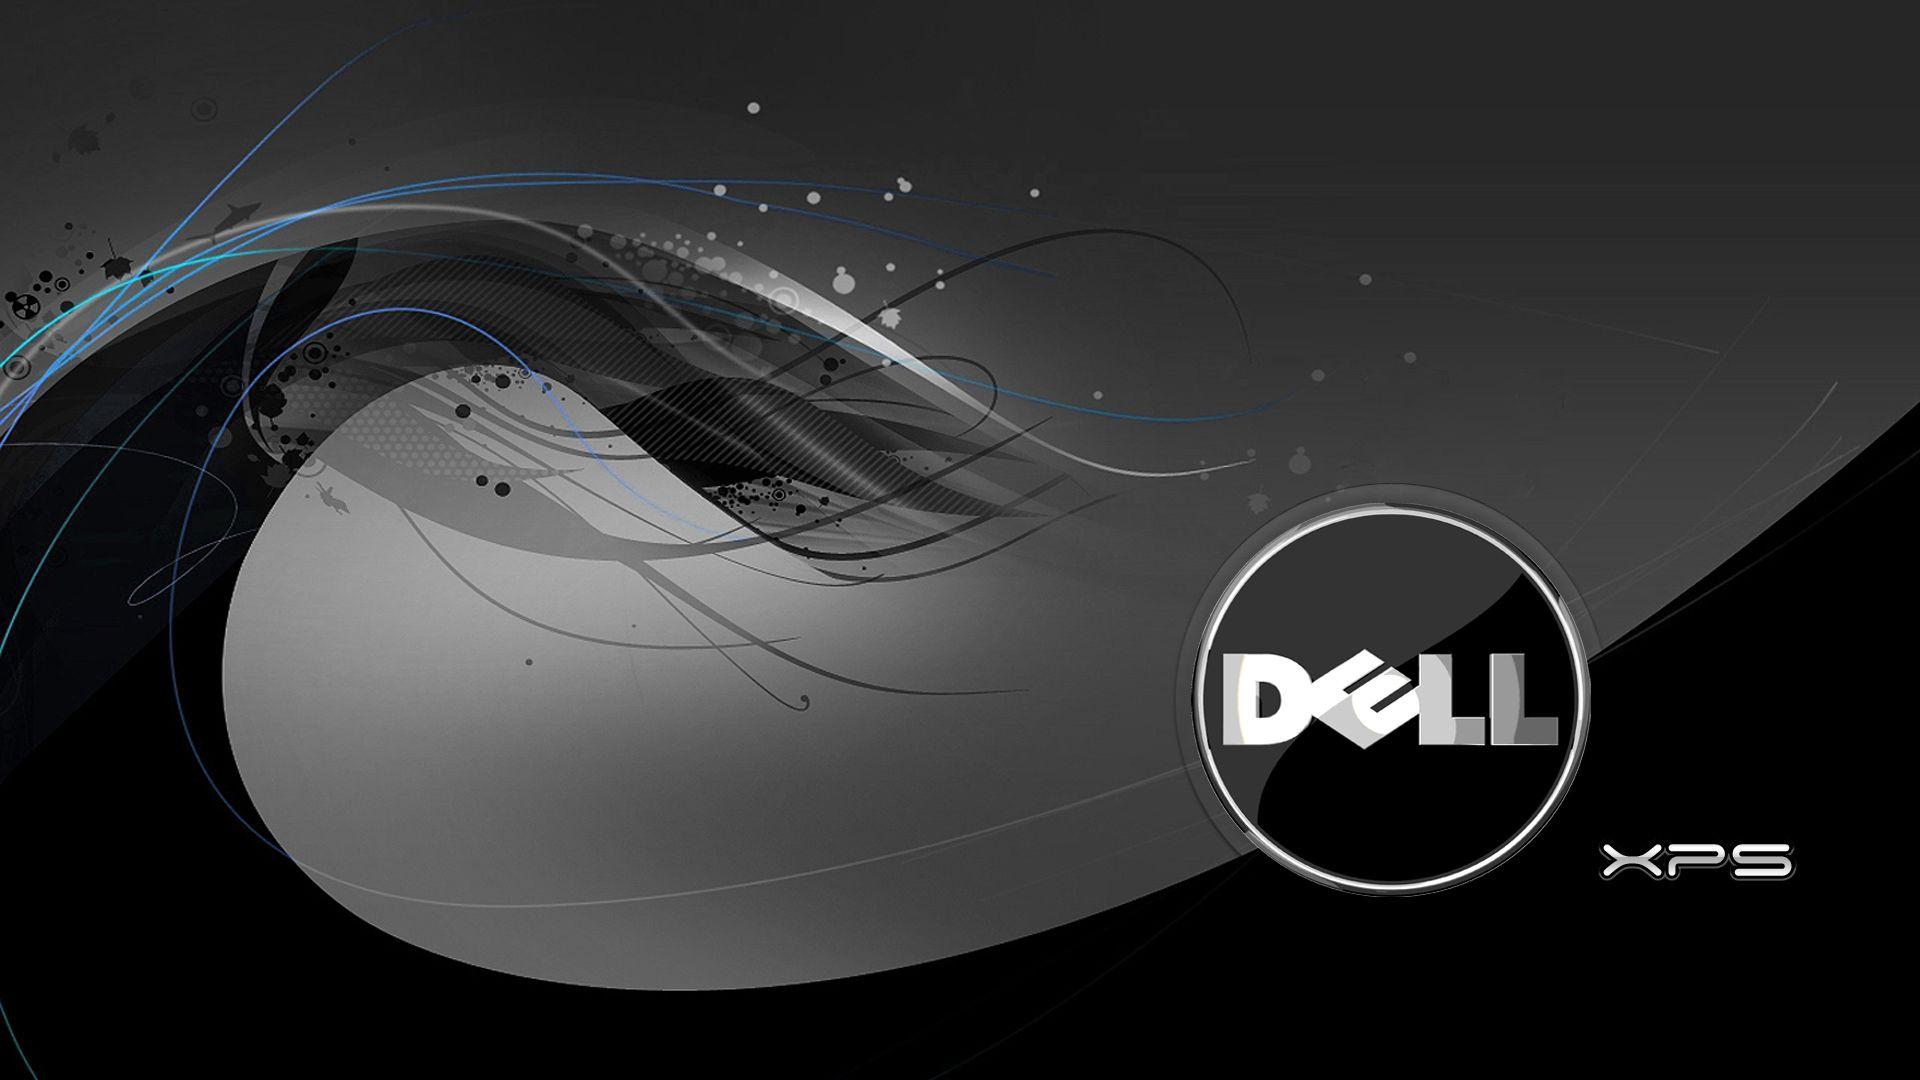 dell image Dell Wallpaper. HD wallpaper and background photo